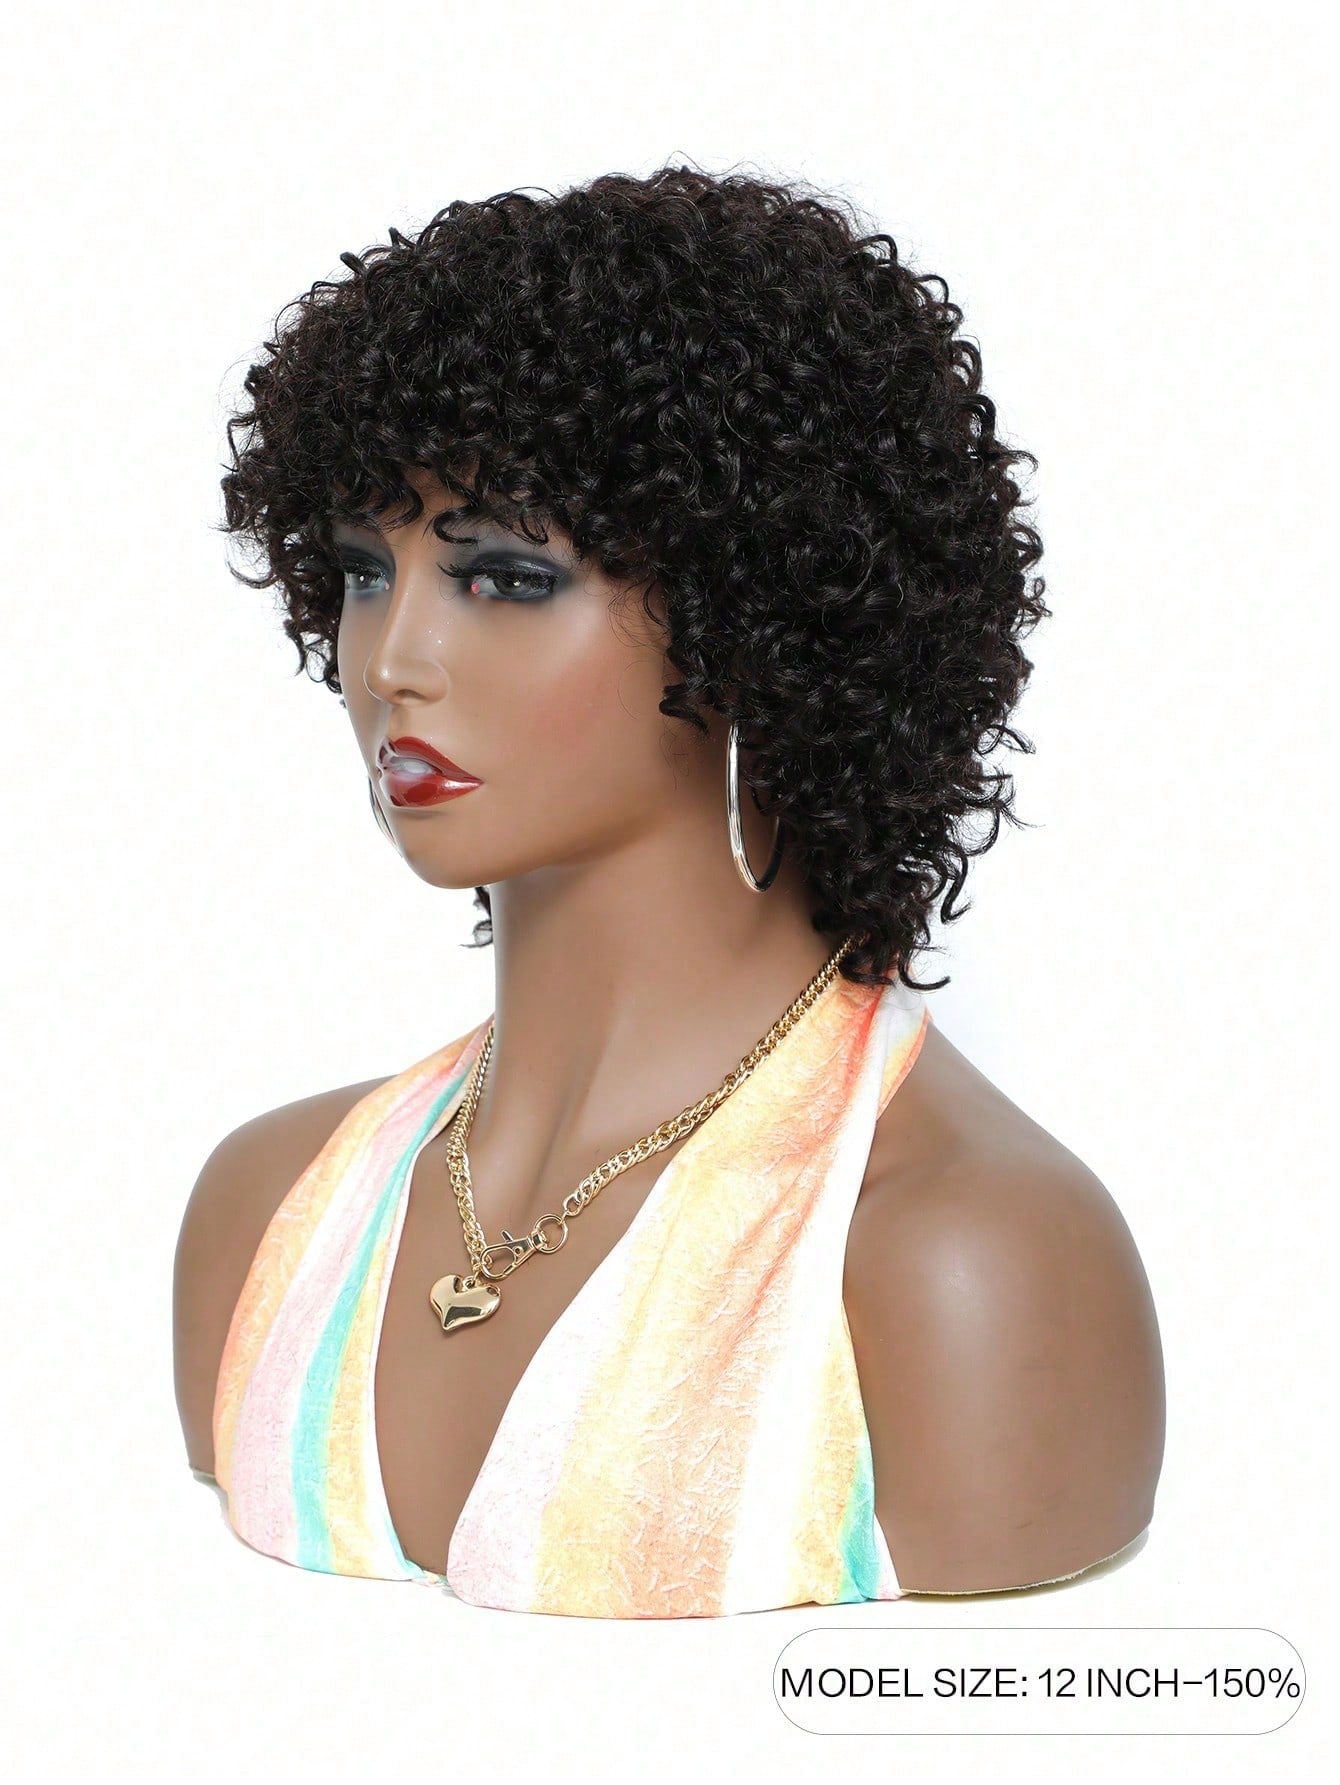 Curly Wigs With Bangs Afro Kinky Curly Big Bouncy Short Human Hair Wig Natural Black Color